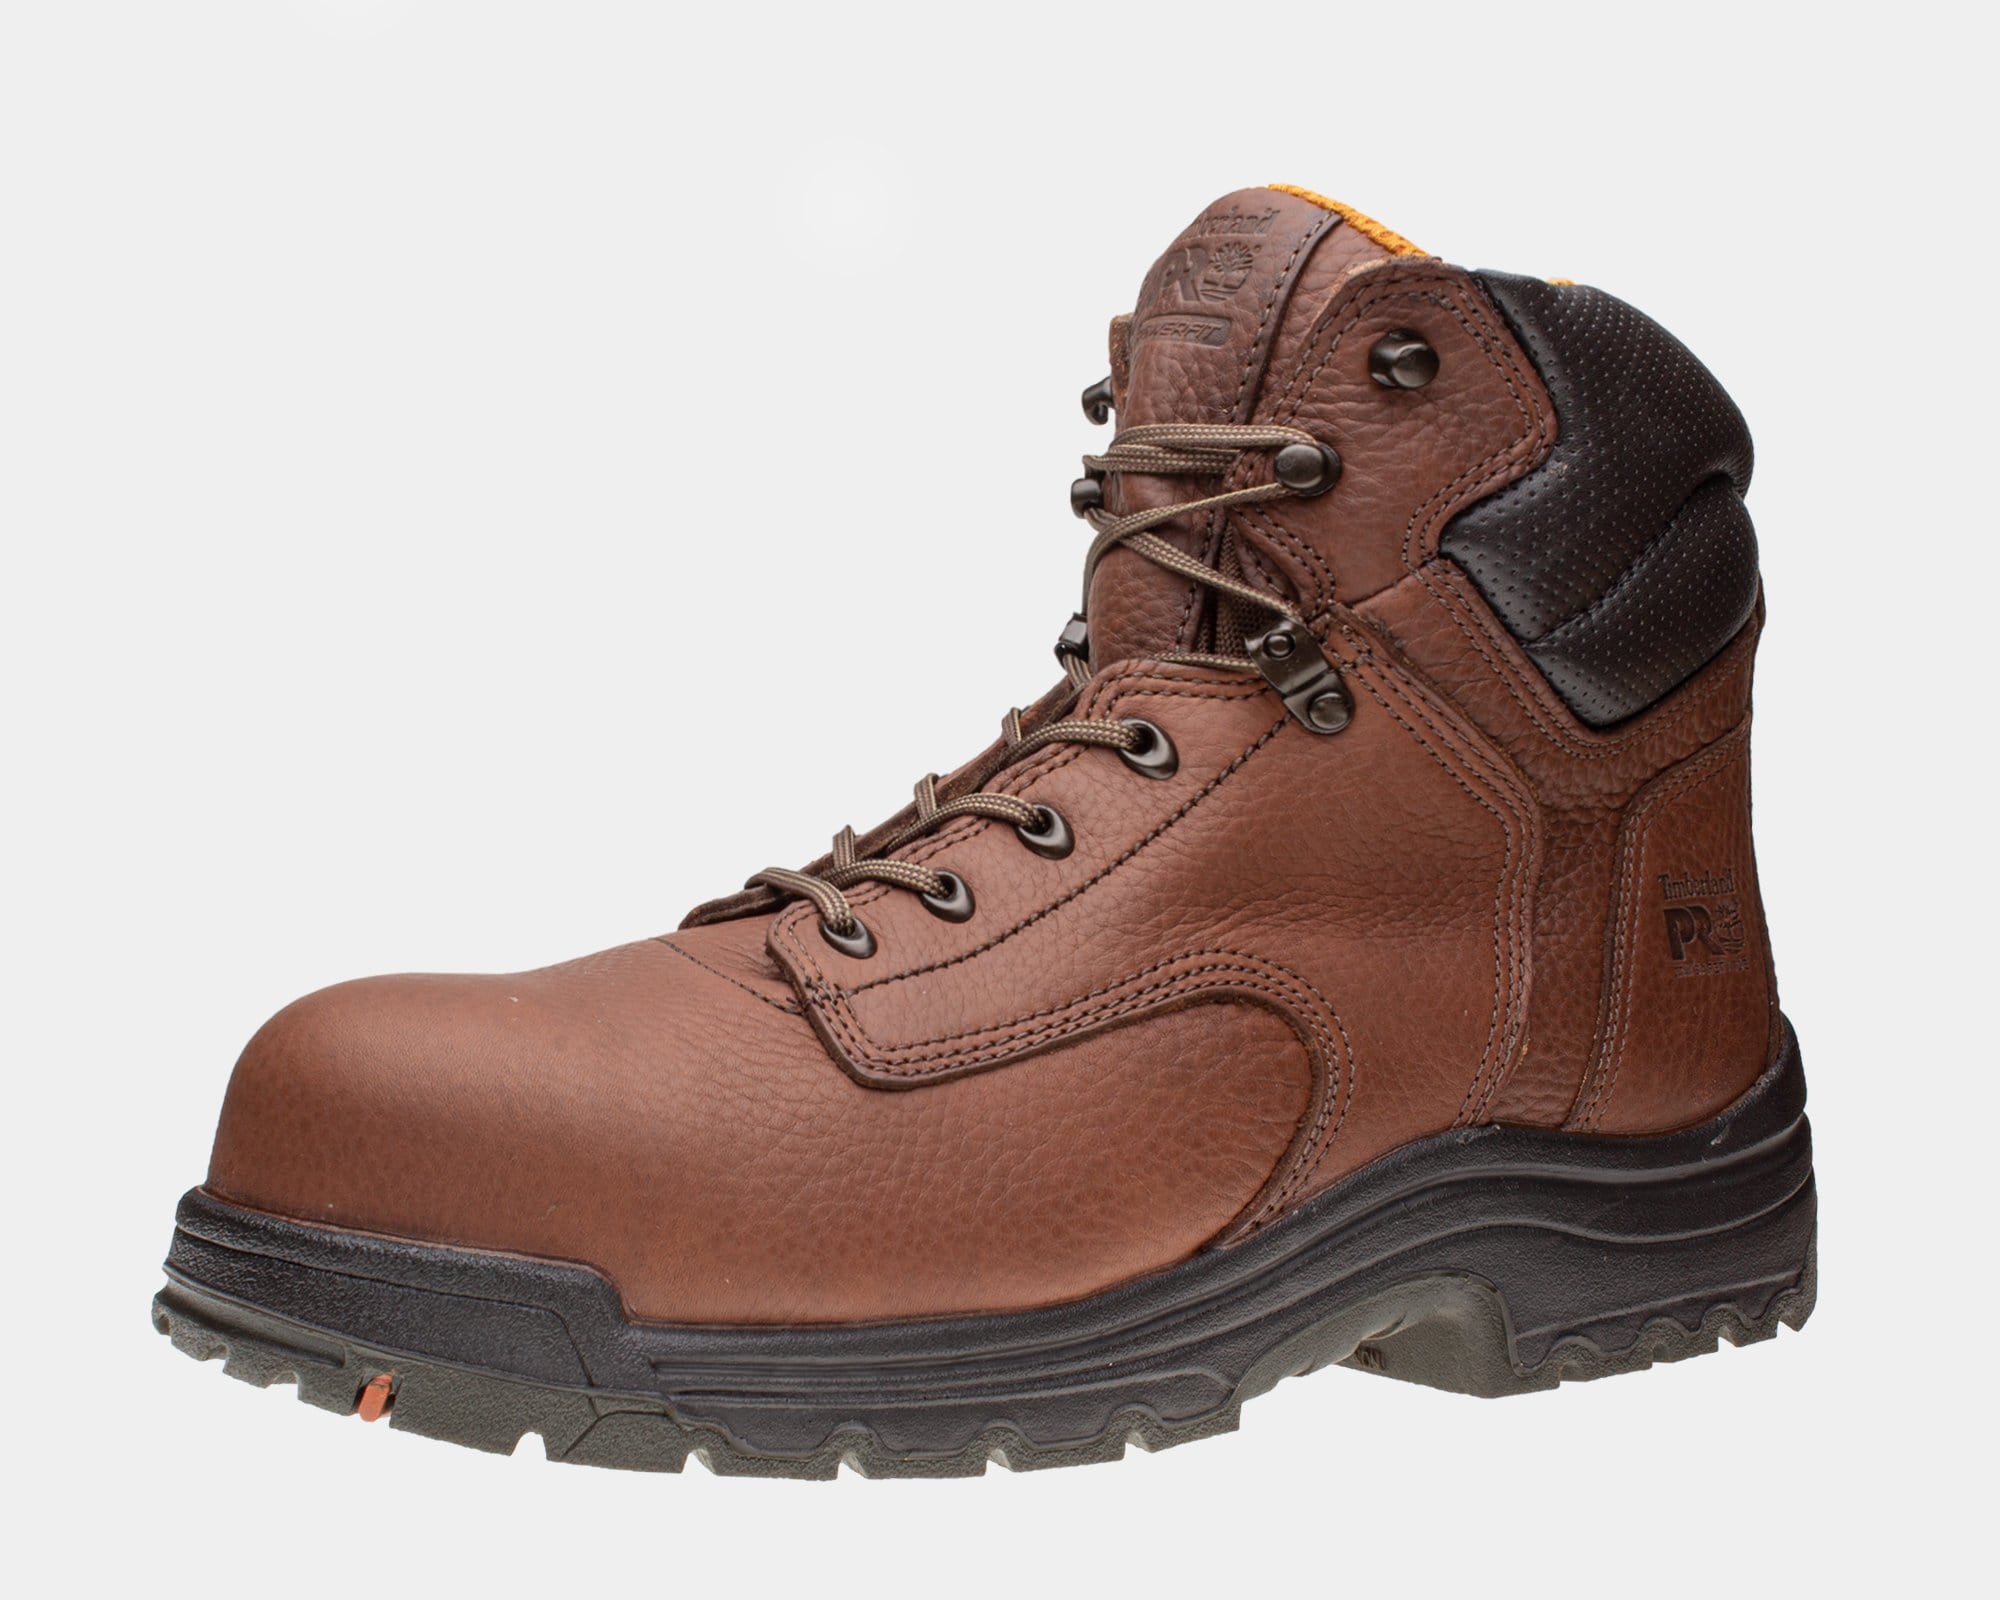 timberland pro titan safety toe work boots